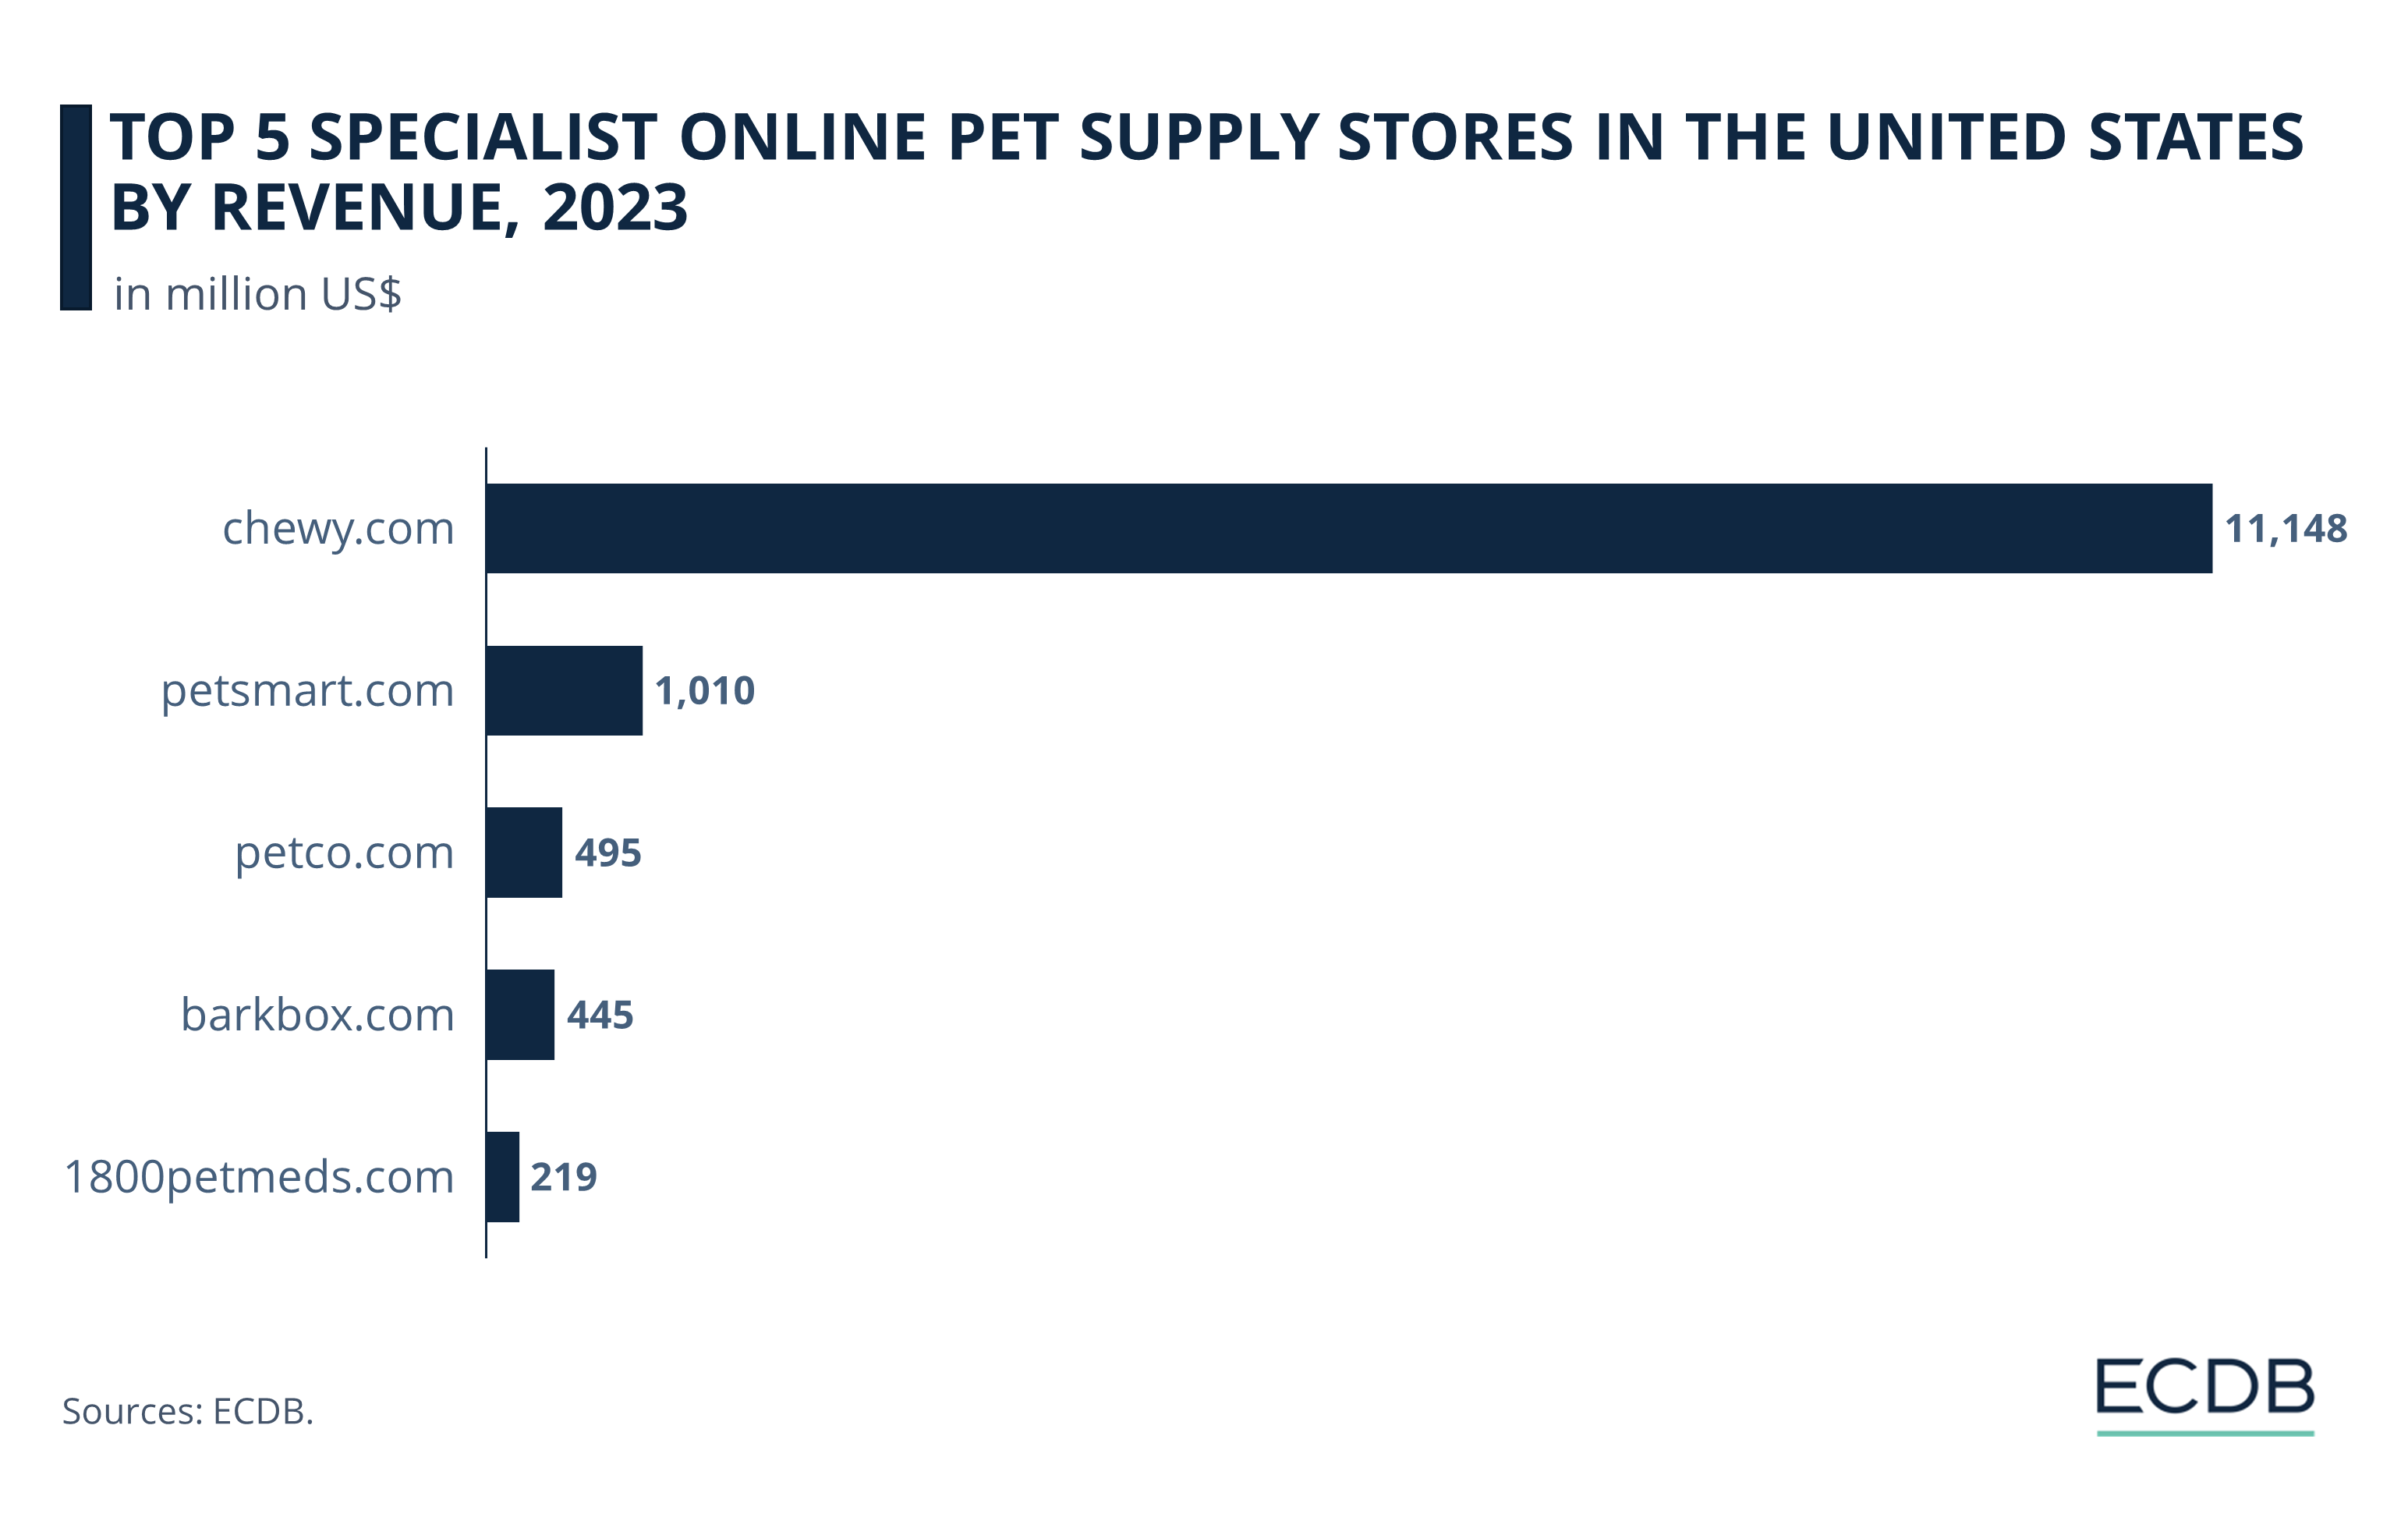 Top 5 Specialist Online Pet Supply Stores in the United States by Revenue, 2023